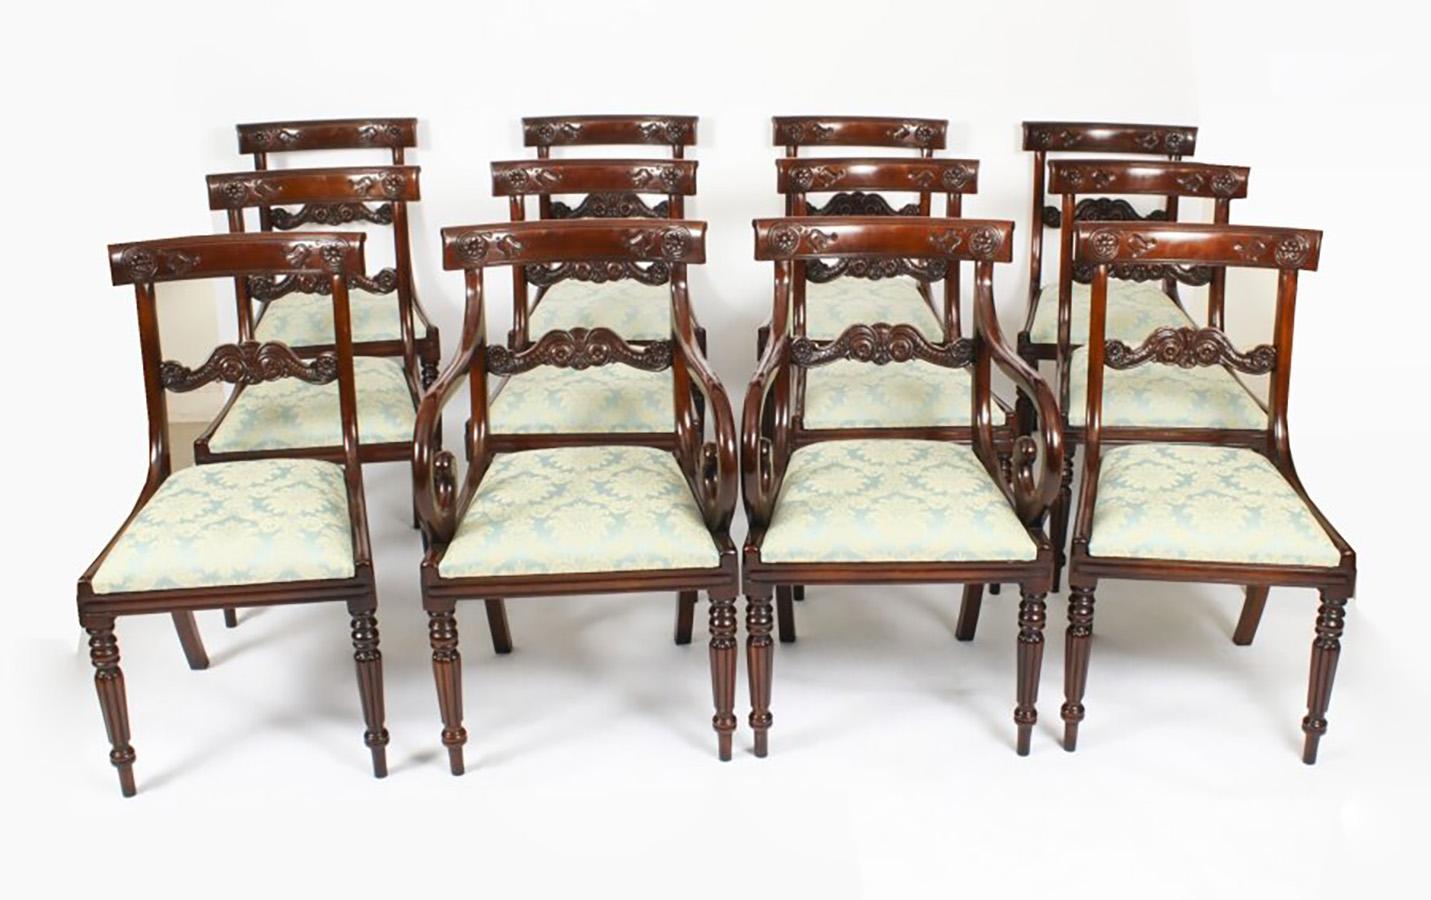 Antique Regency Concertina Action Dining Table 19th C & 10 chairs For Sale 10